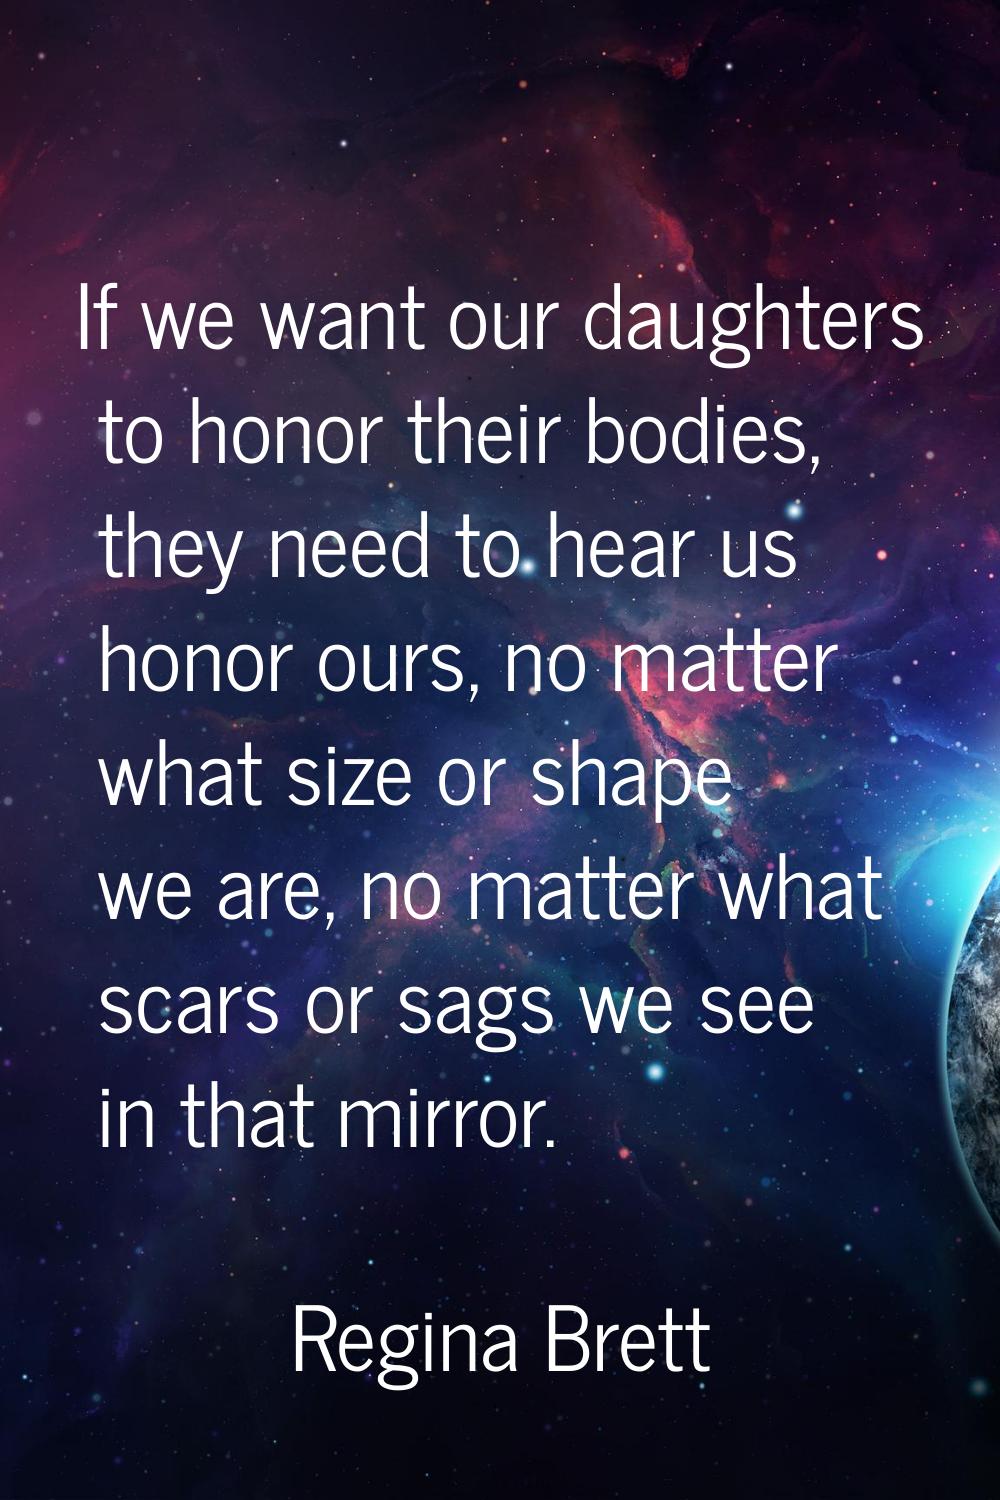 If we want our daughters to honor their bodies, they need to hear us honor ours, no matter what siz